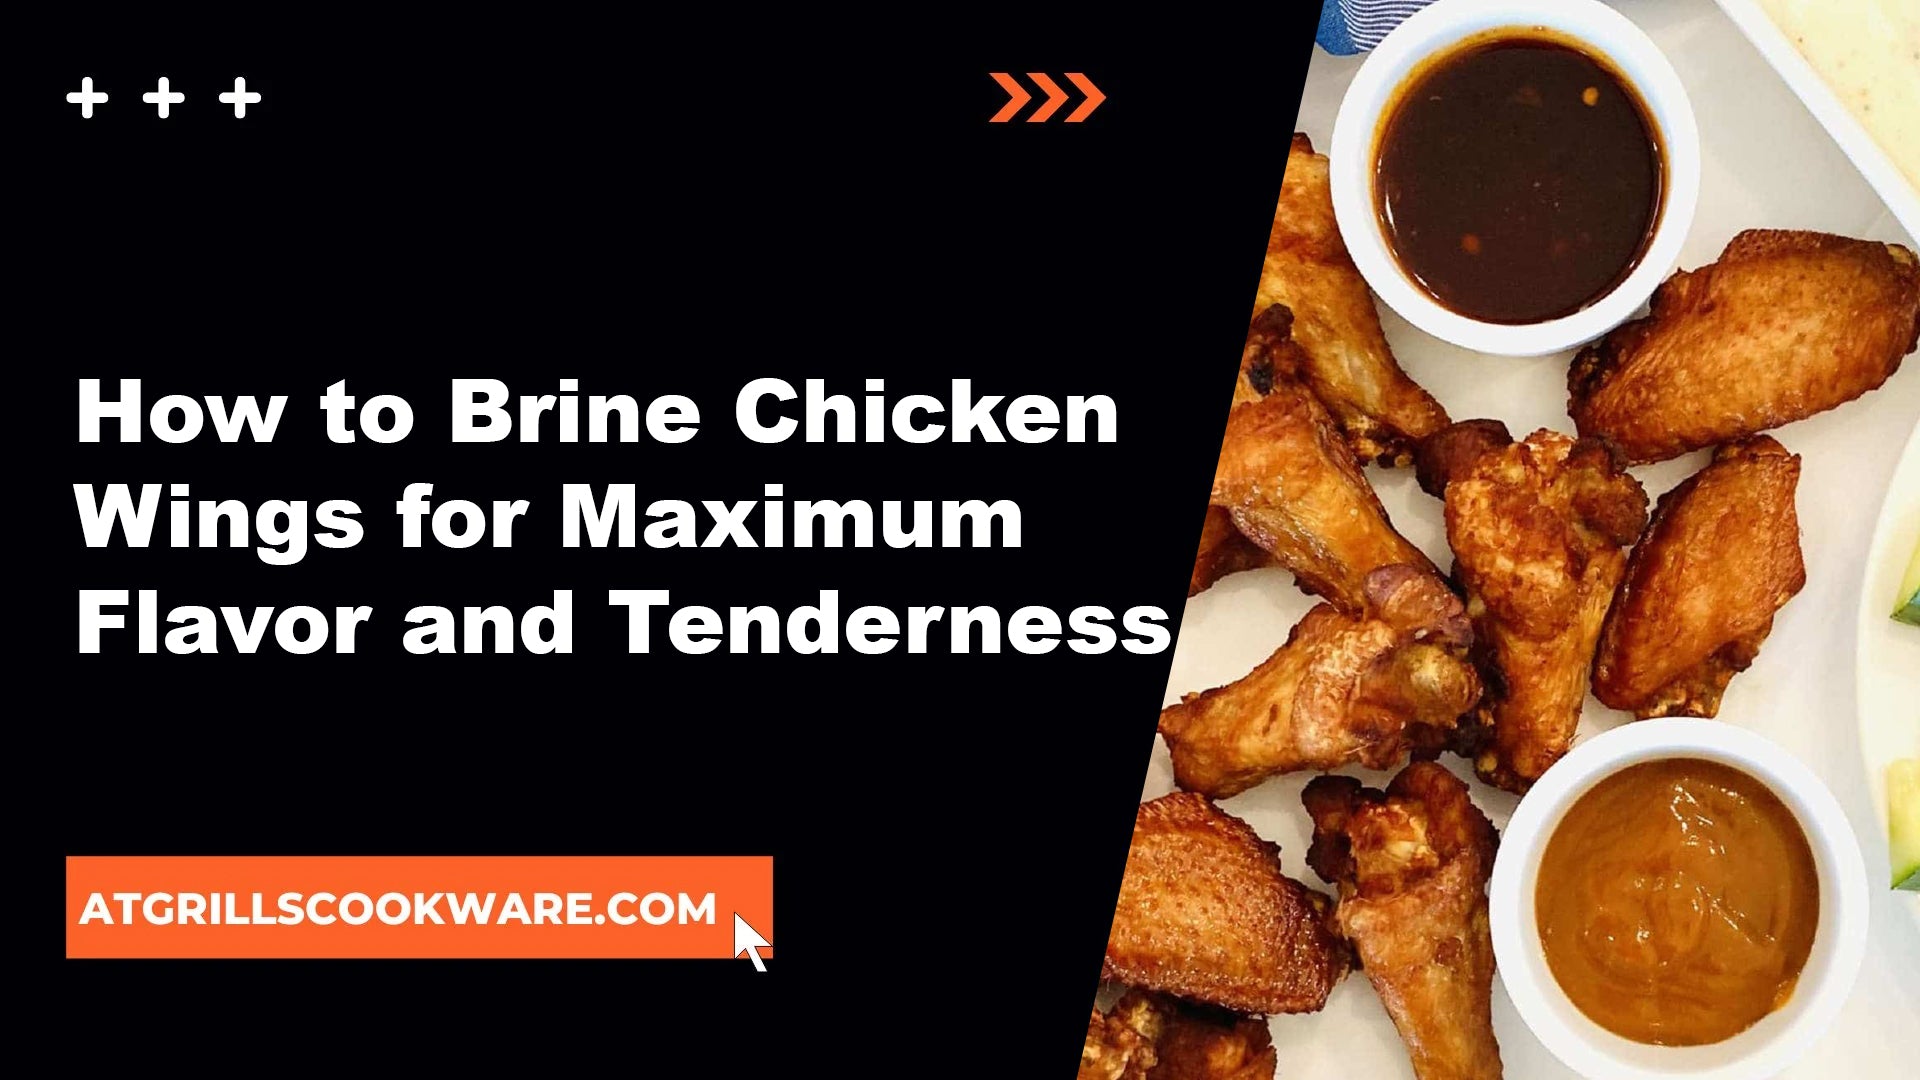 How to Brine Chicken Wings for Maximum Flavor and Tenderness